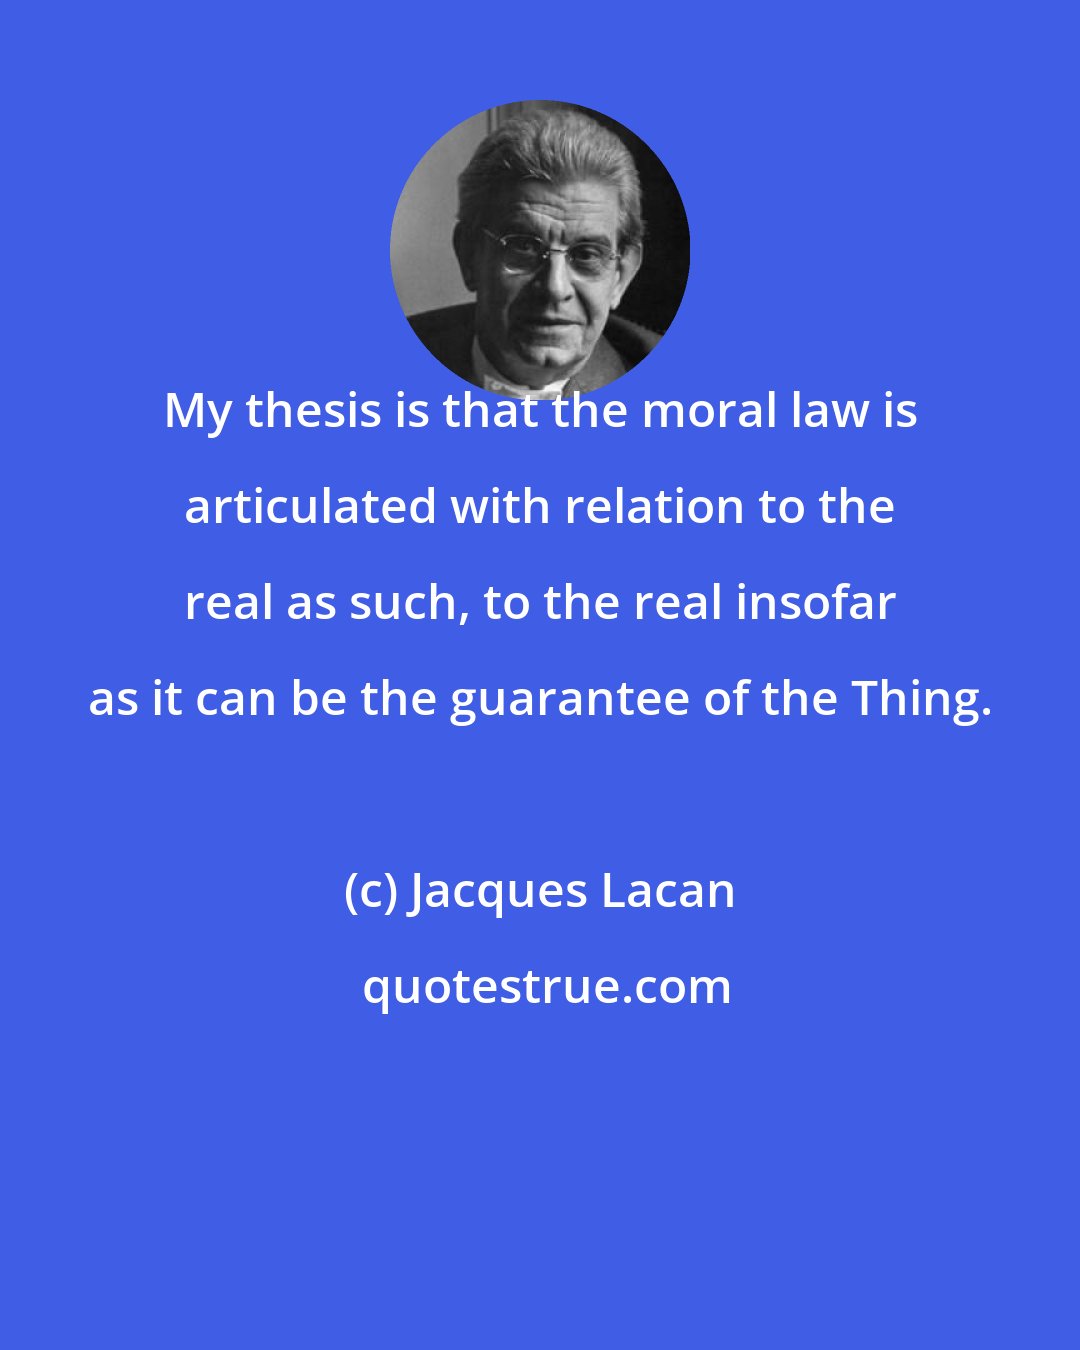 Jacques Lacan: My thesis is that the moral law is articulated with relation to the real as such, to the real insofar as it can be the guarantee of the Thing.